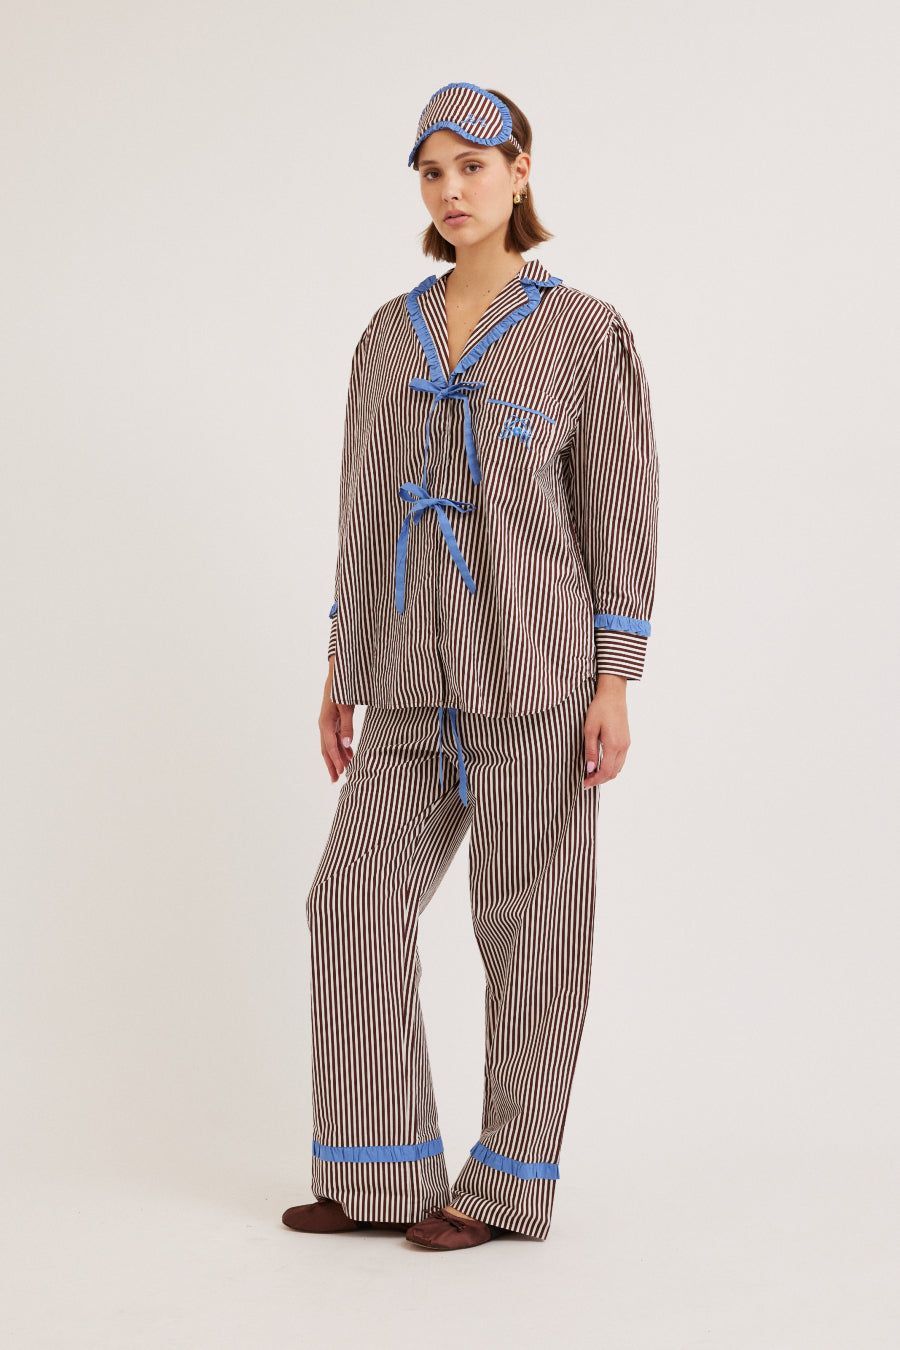 These SKIMS swaps are *giving* luxury loungewear vibes but without